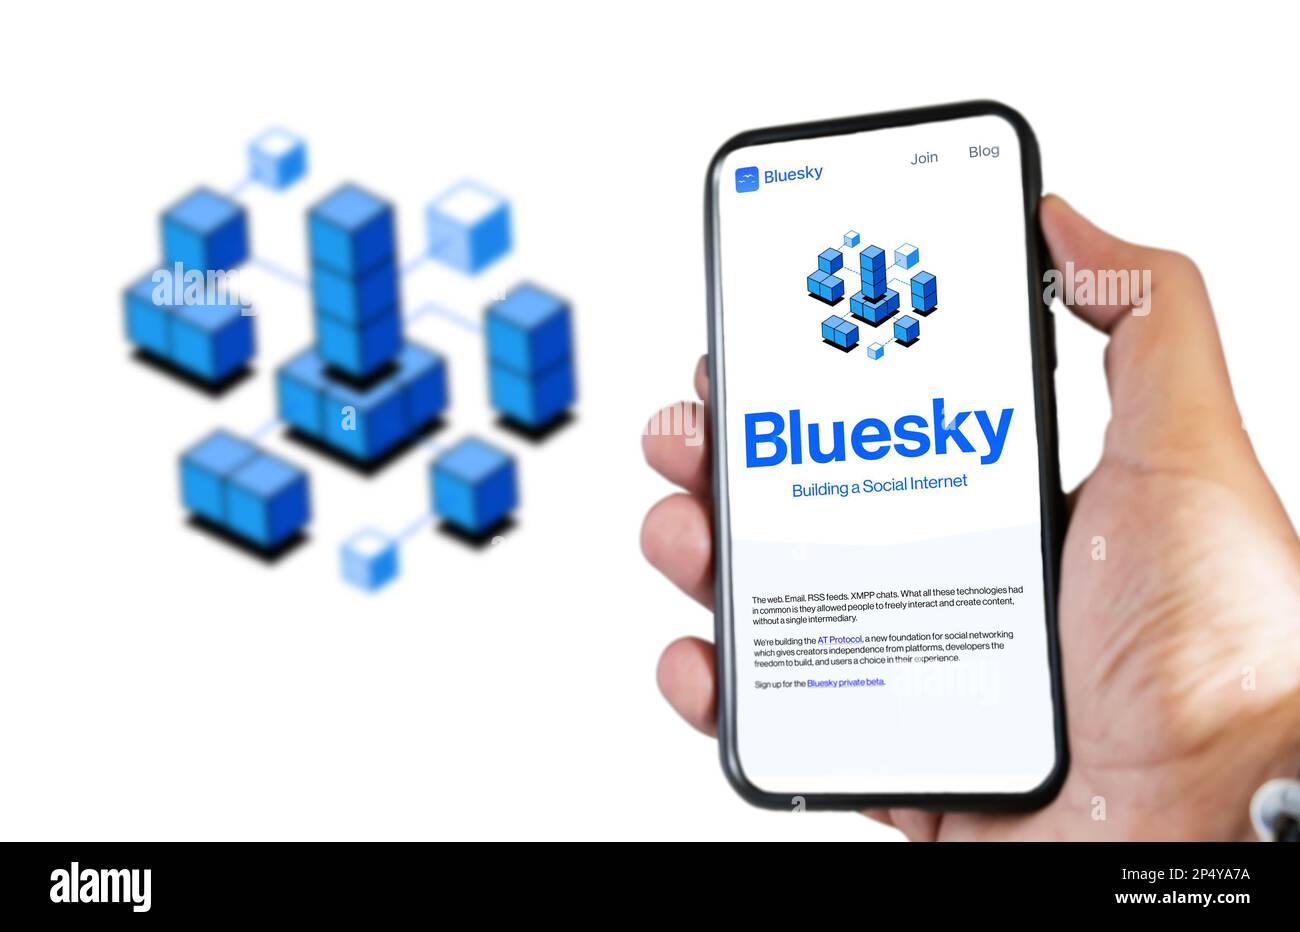 San Francisco, US, Feb 2023: hand holding a phone with Bluesky mobile app on screen. Bluesky is an initiative to develop a decentralized social networ Stock Photo